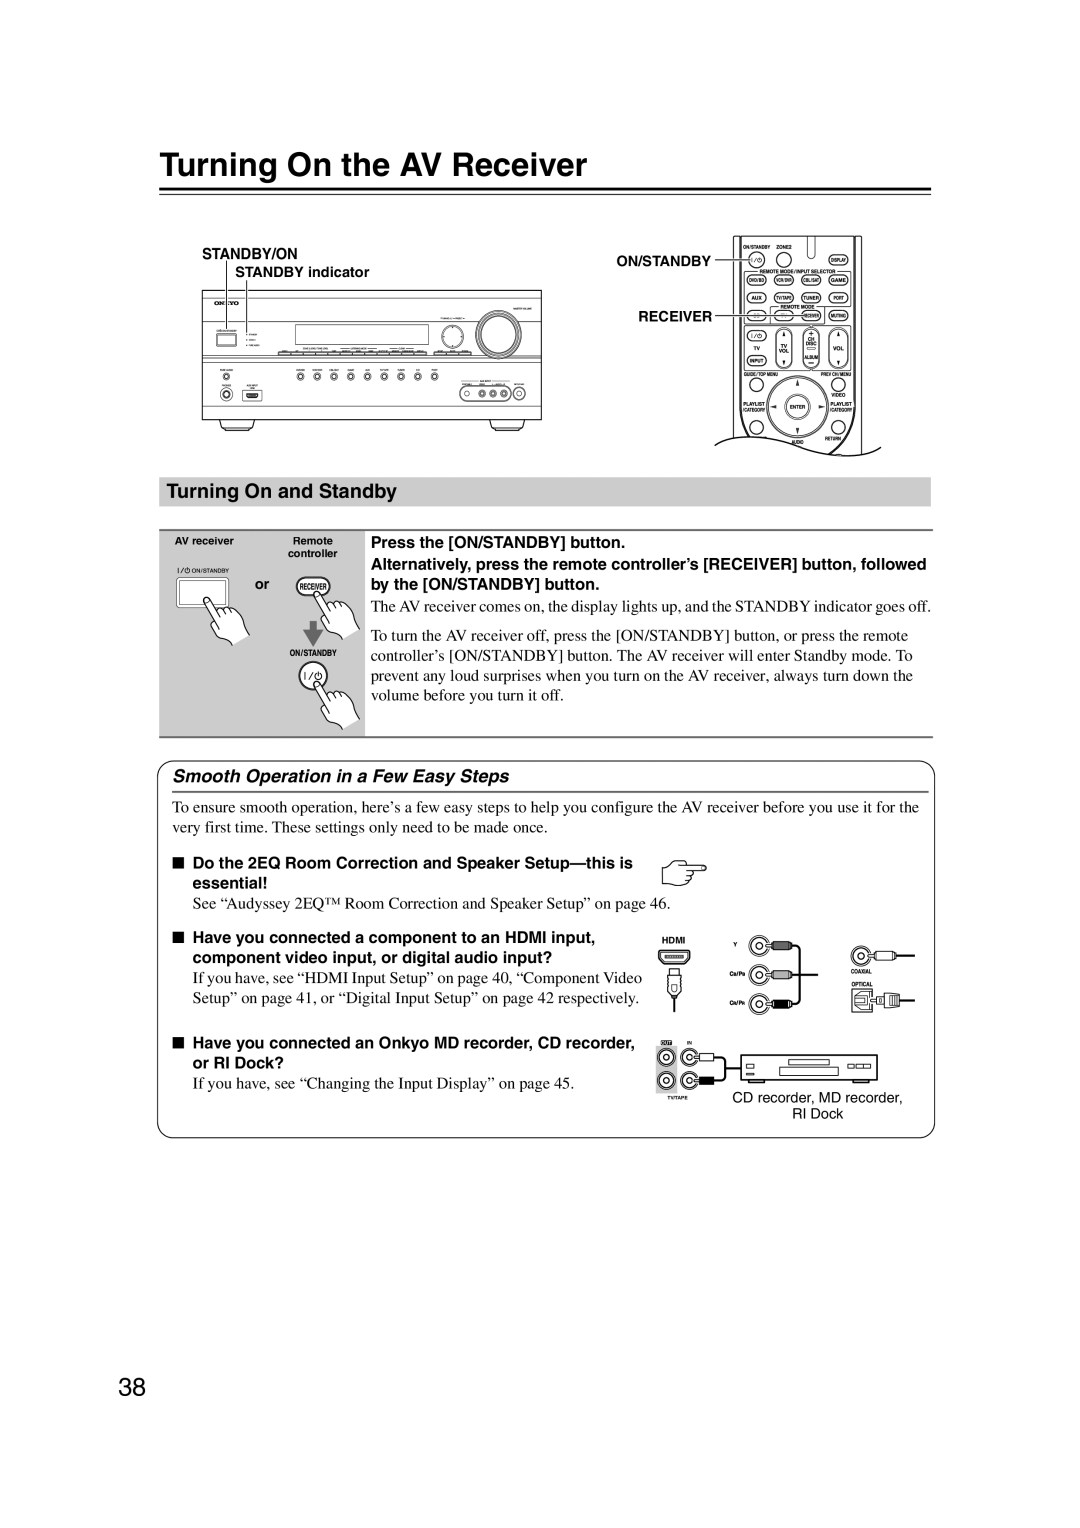 Onkyo SR607 instruction manual Turning On the AV Receiver, Turning On and Standby, Smooth Operation in a Few Easy Steps 